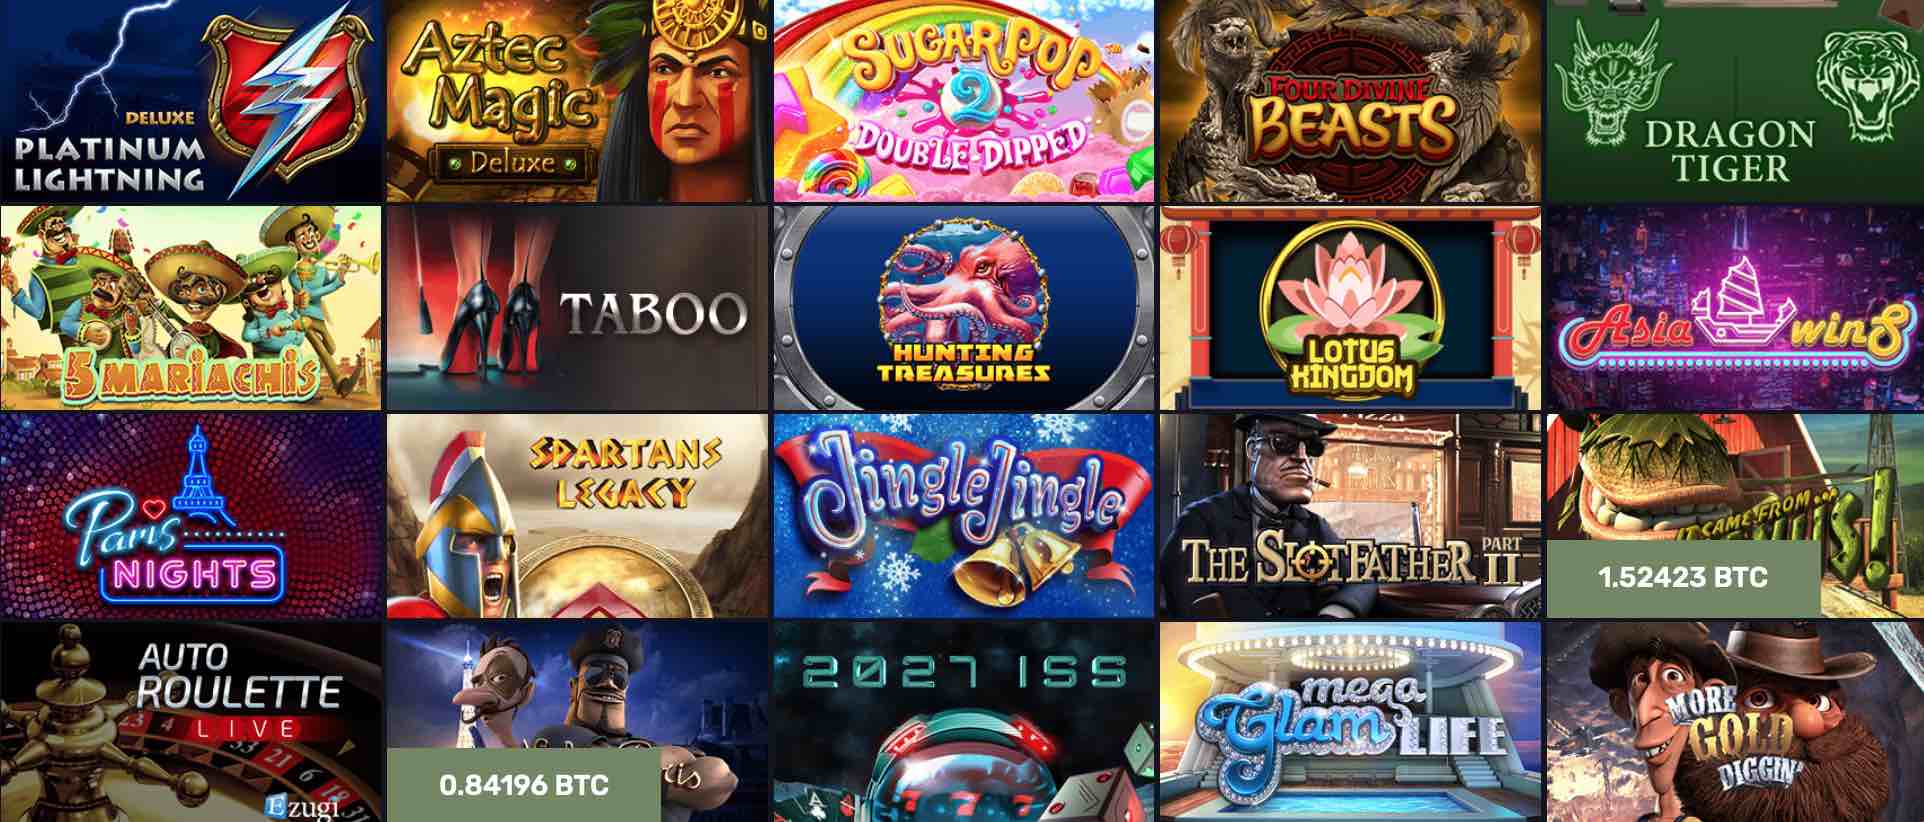 Online casinos offering free slot tournaments